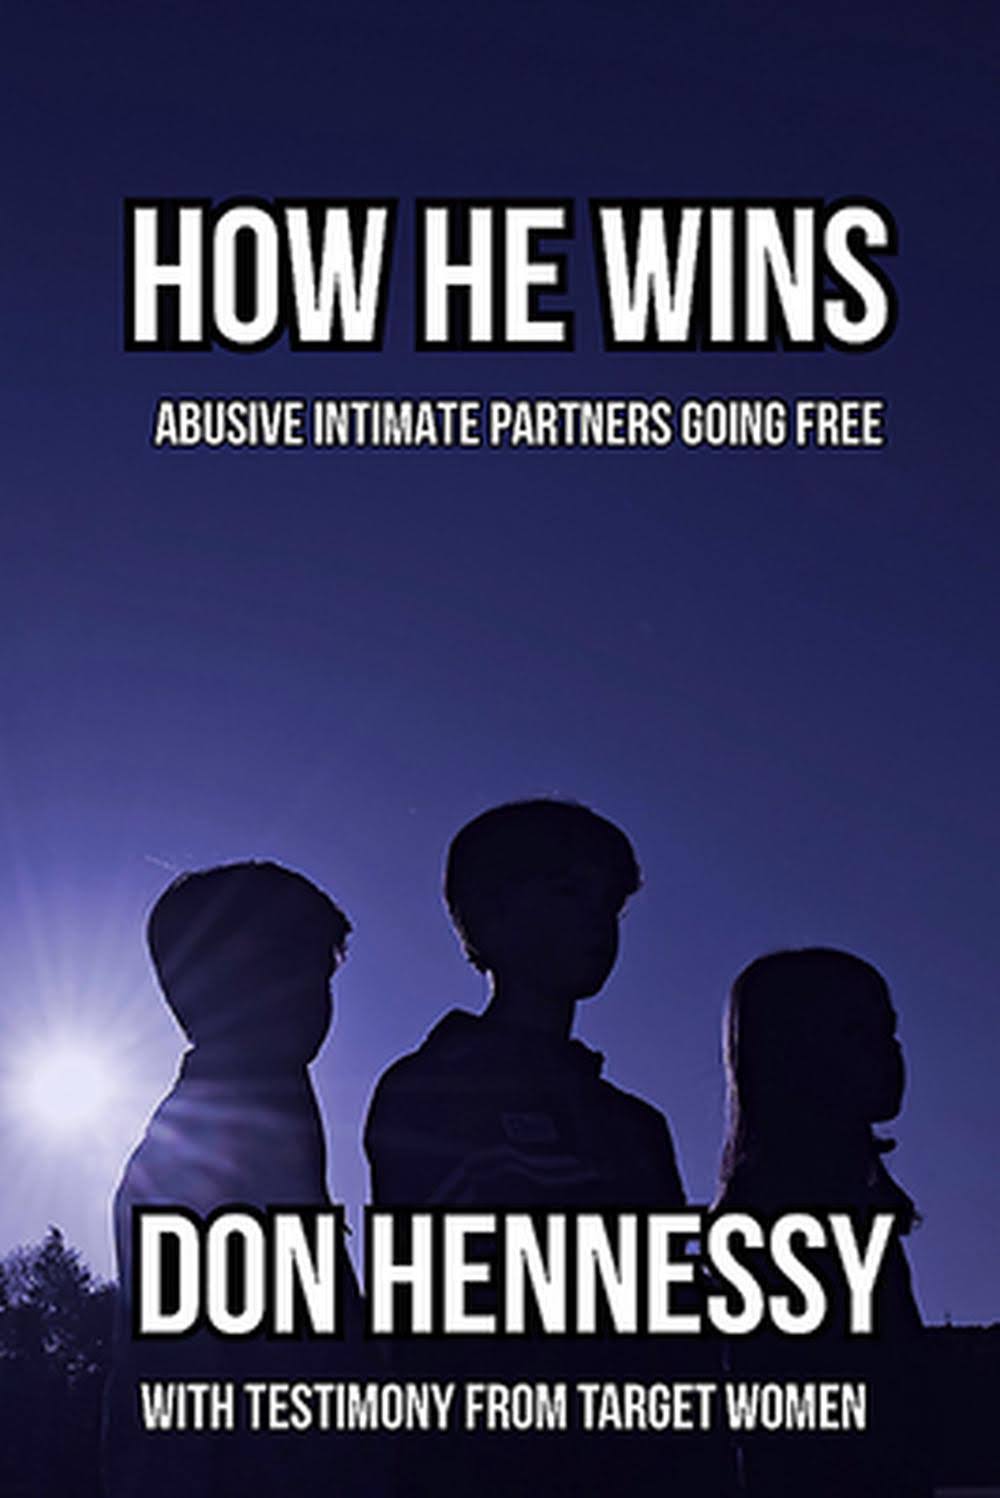 How He Wins by Don Hennessy